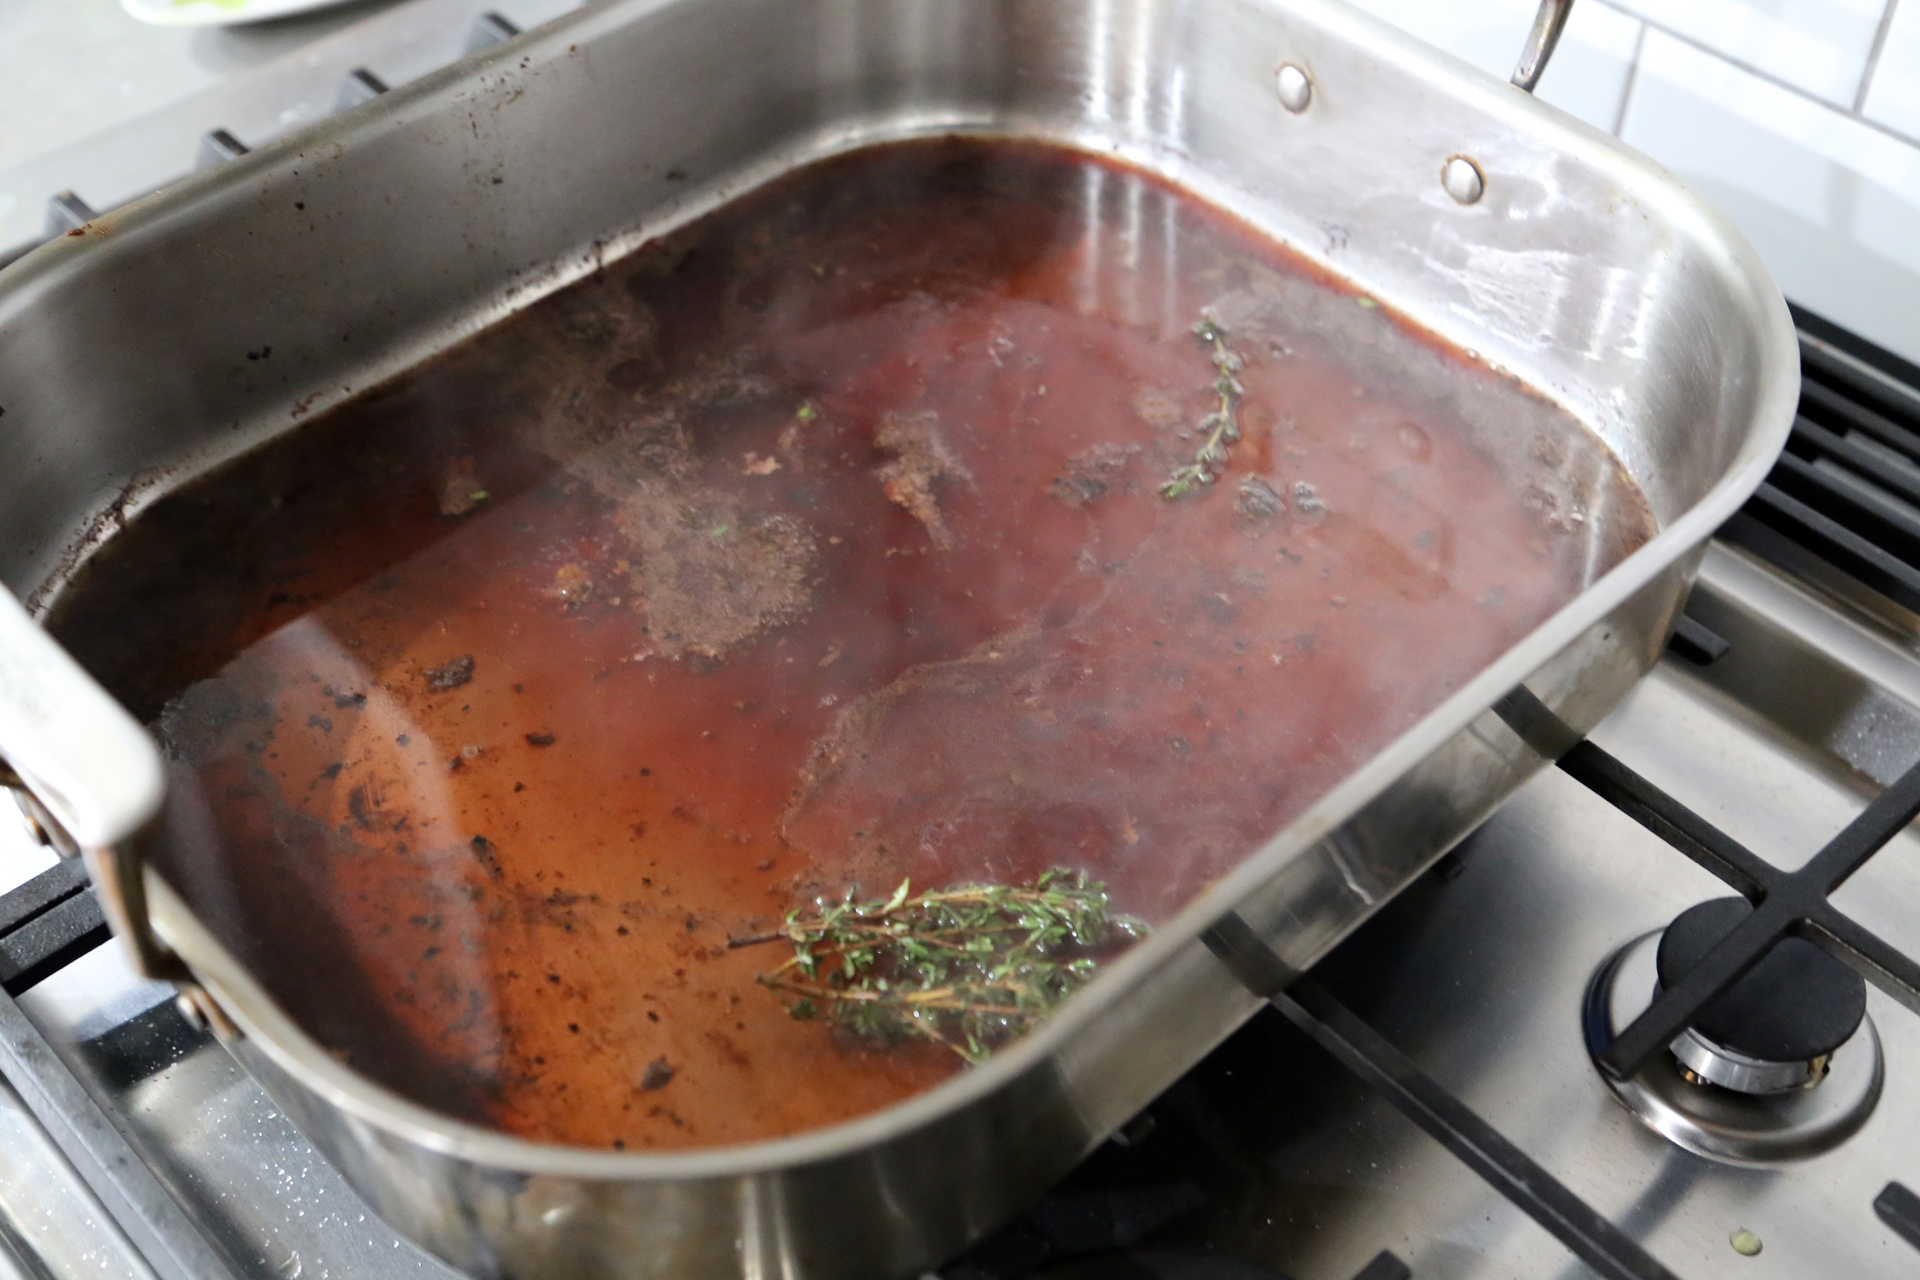 Return the juices to the roasting pan and set the pan on the stovetop over medium heat (you may need to put it over the griddle burner or 2 burners). Add the beef stock, wine, and thyme sprigs.